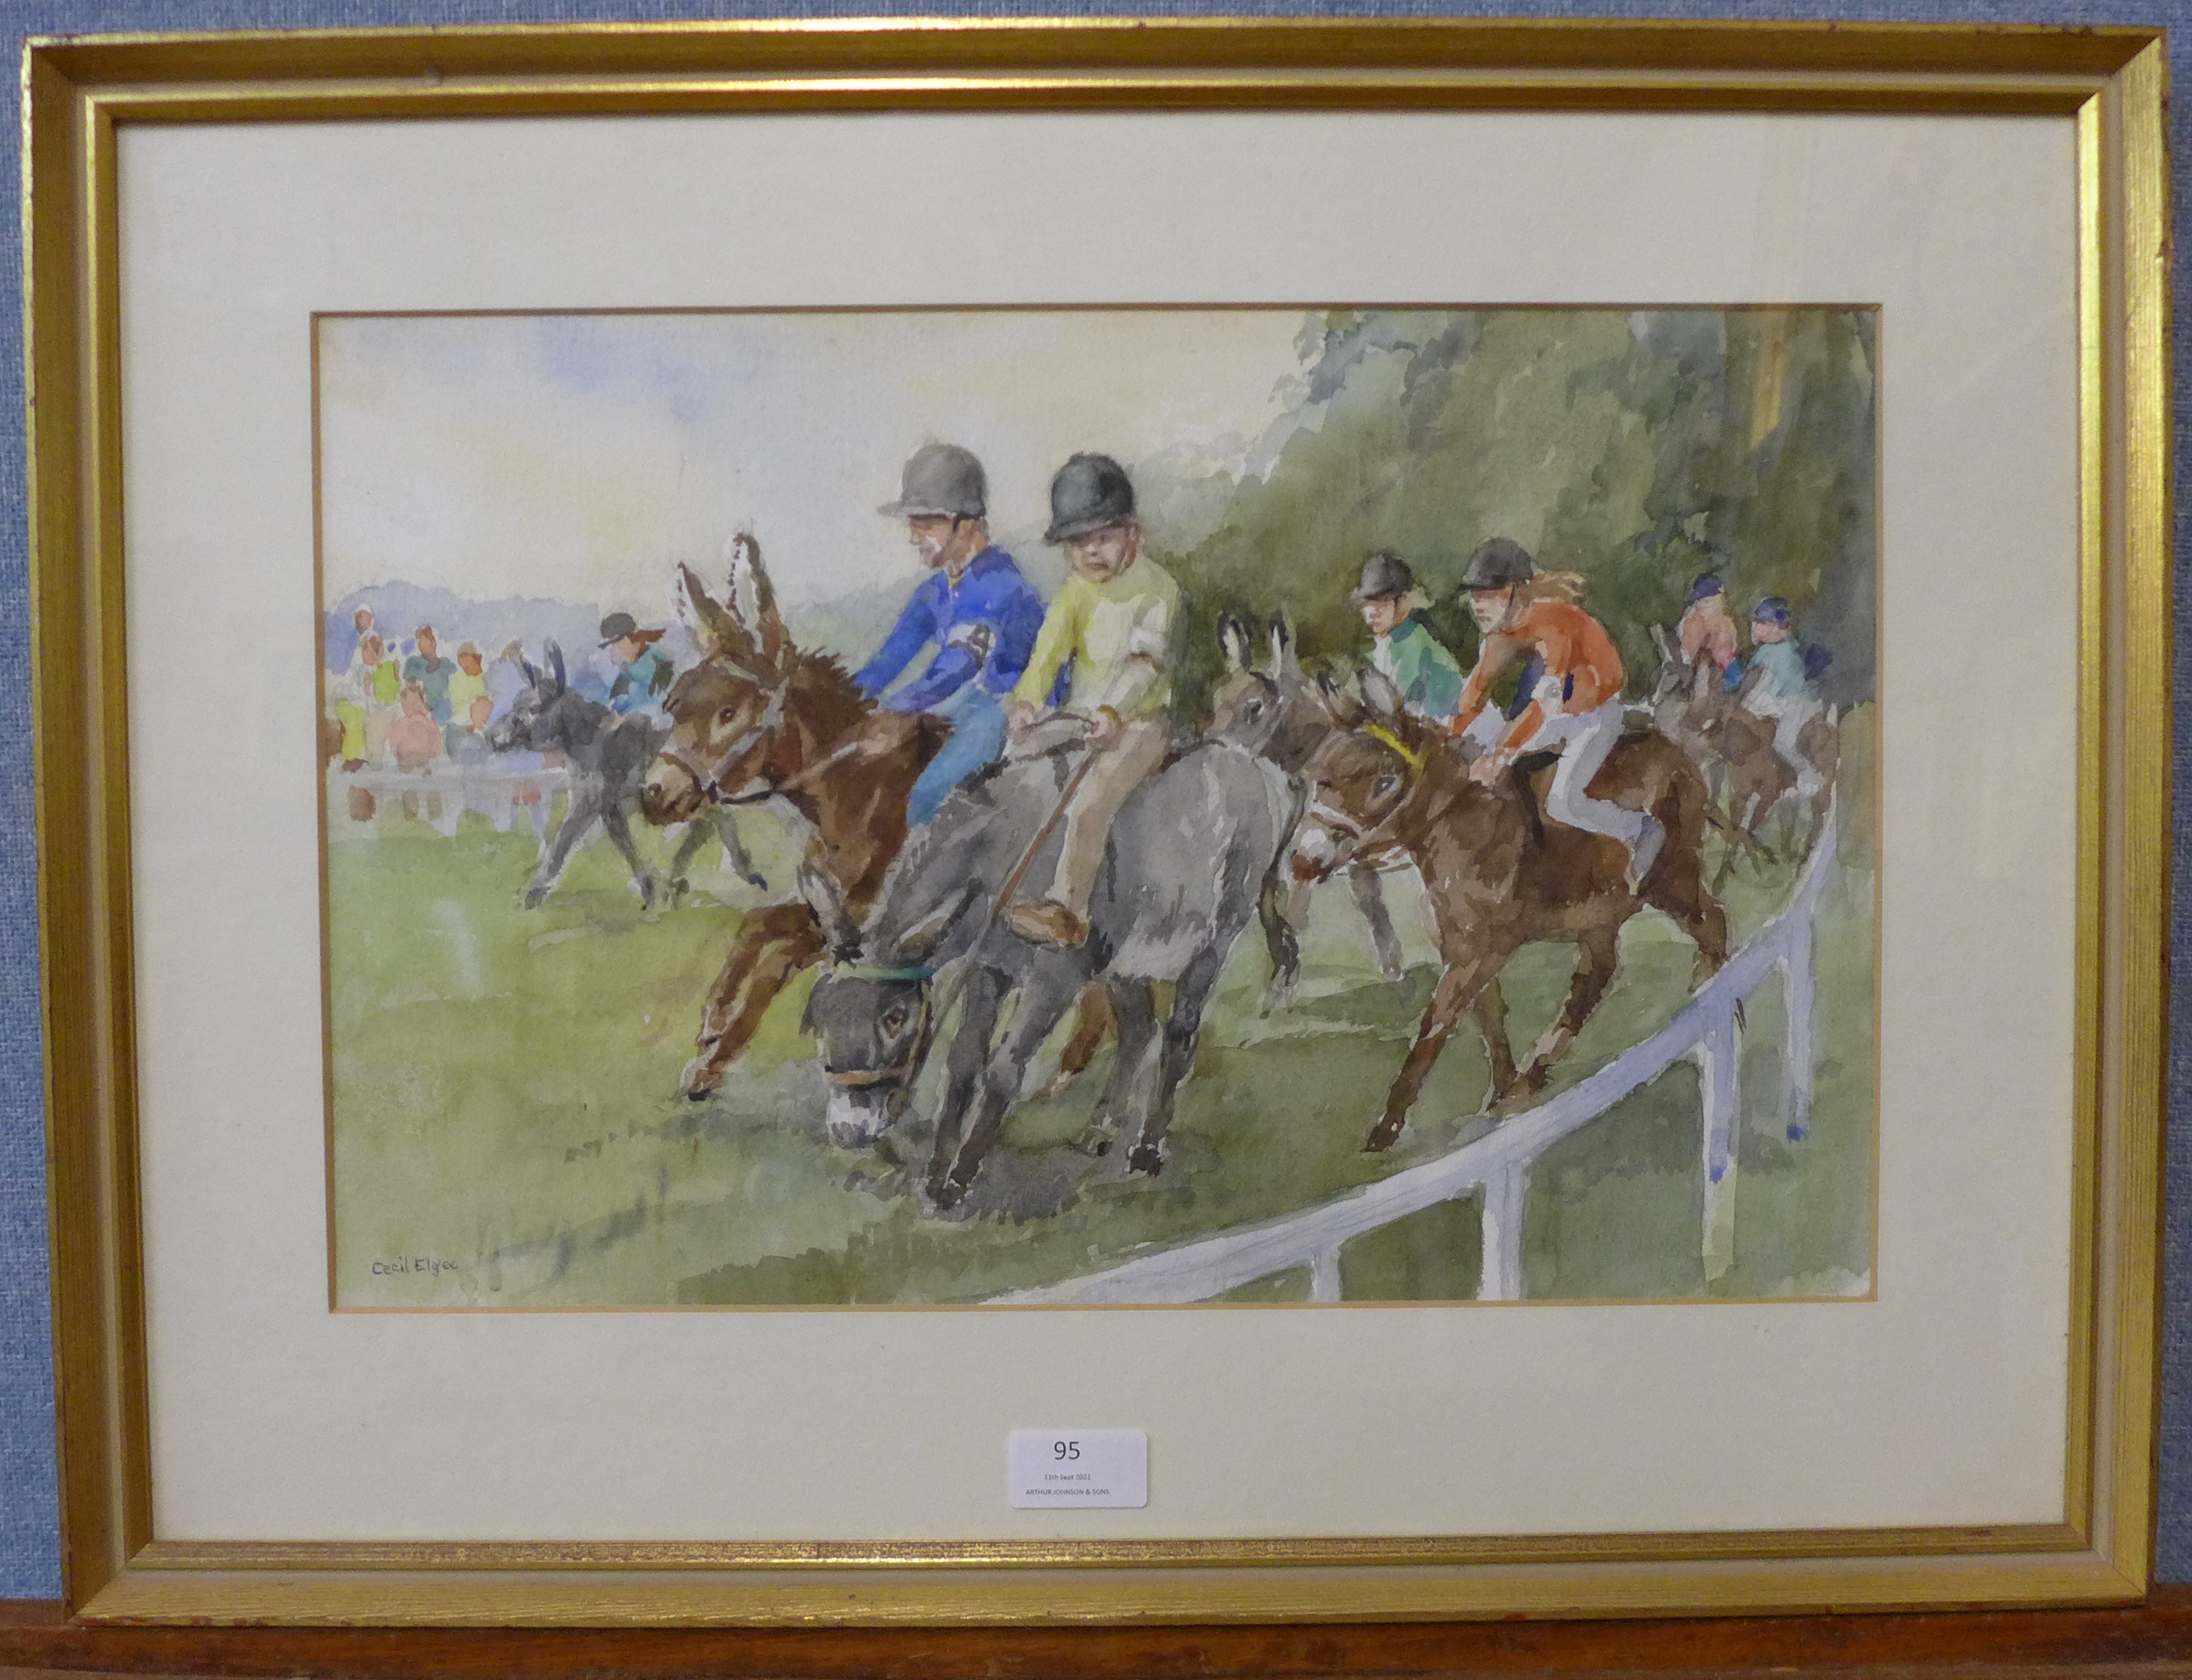 Cecil Elgee (mid 20th Century), The Donkey Derby, watercolour, 27 x 43cms, framed - Image 2 of 3